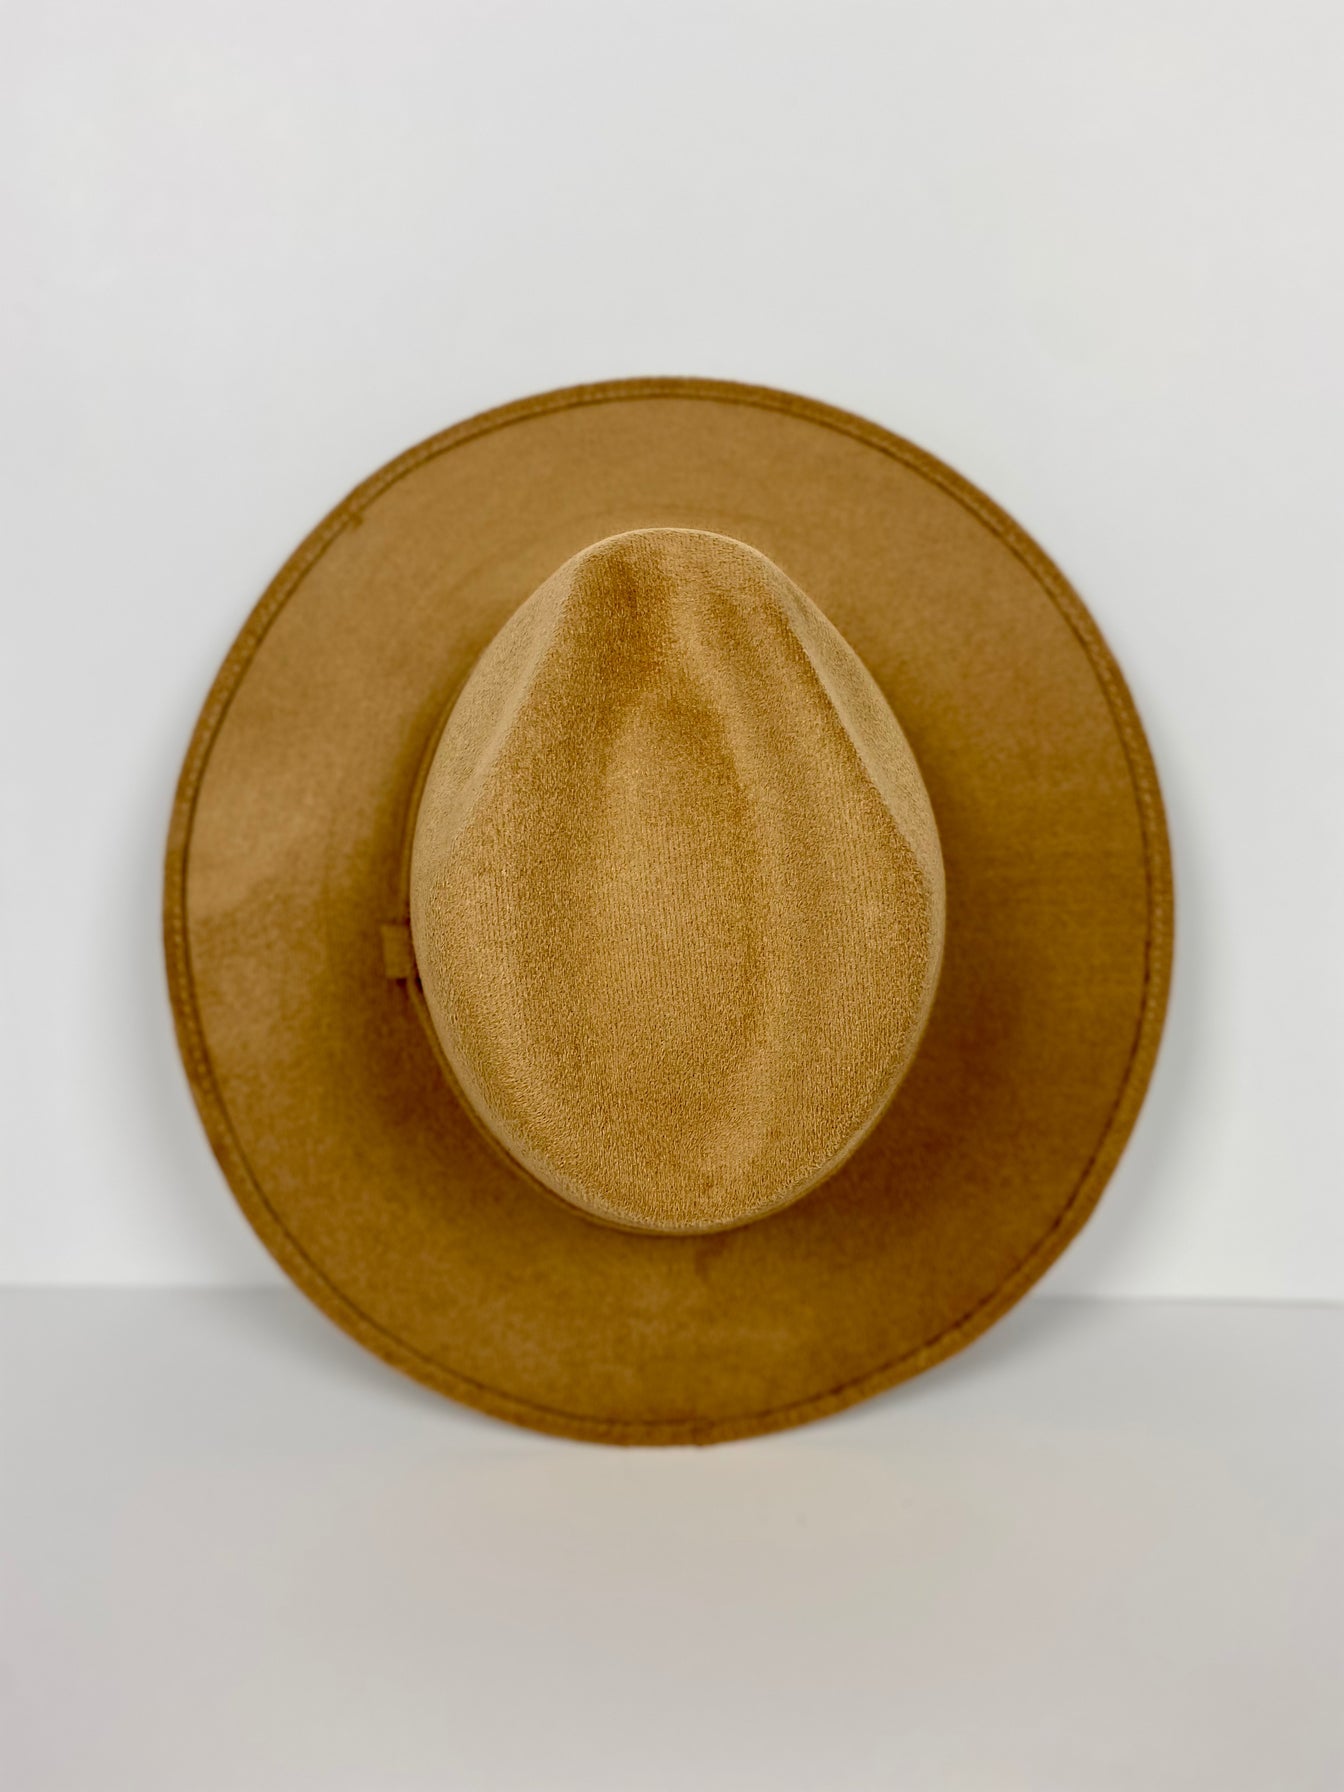 Kid's Western Style Hat - Cappuccino